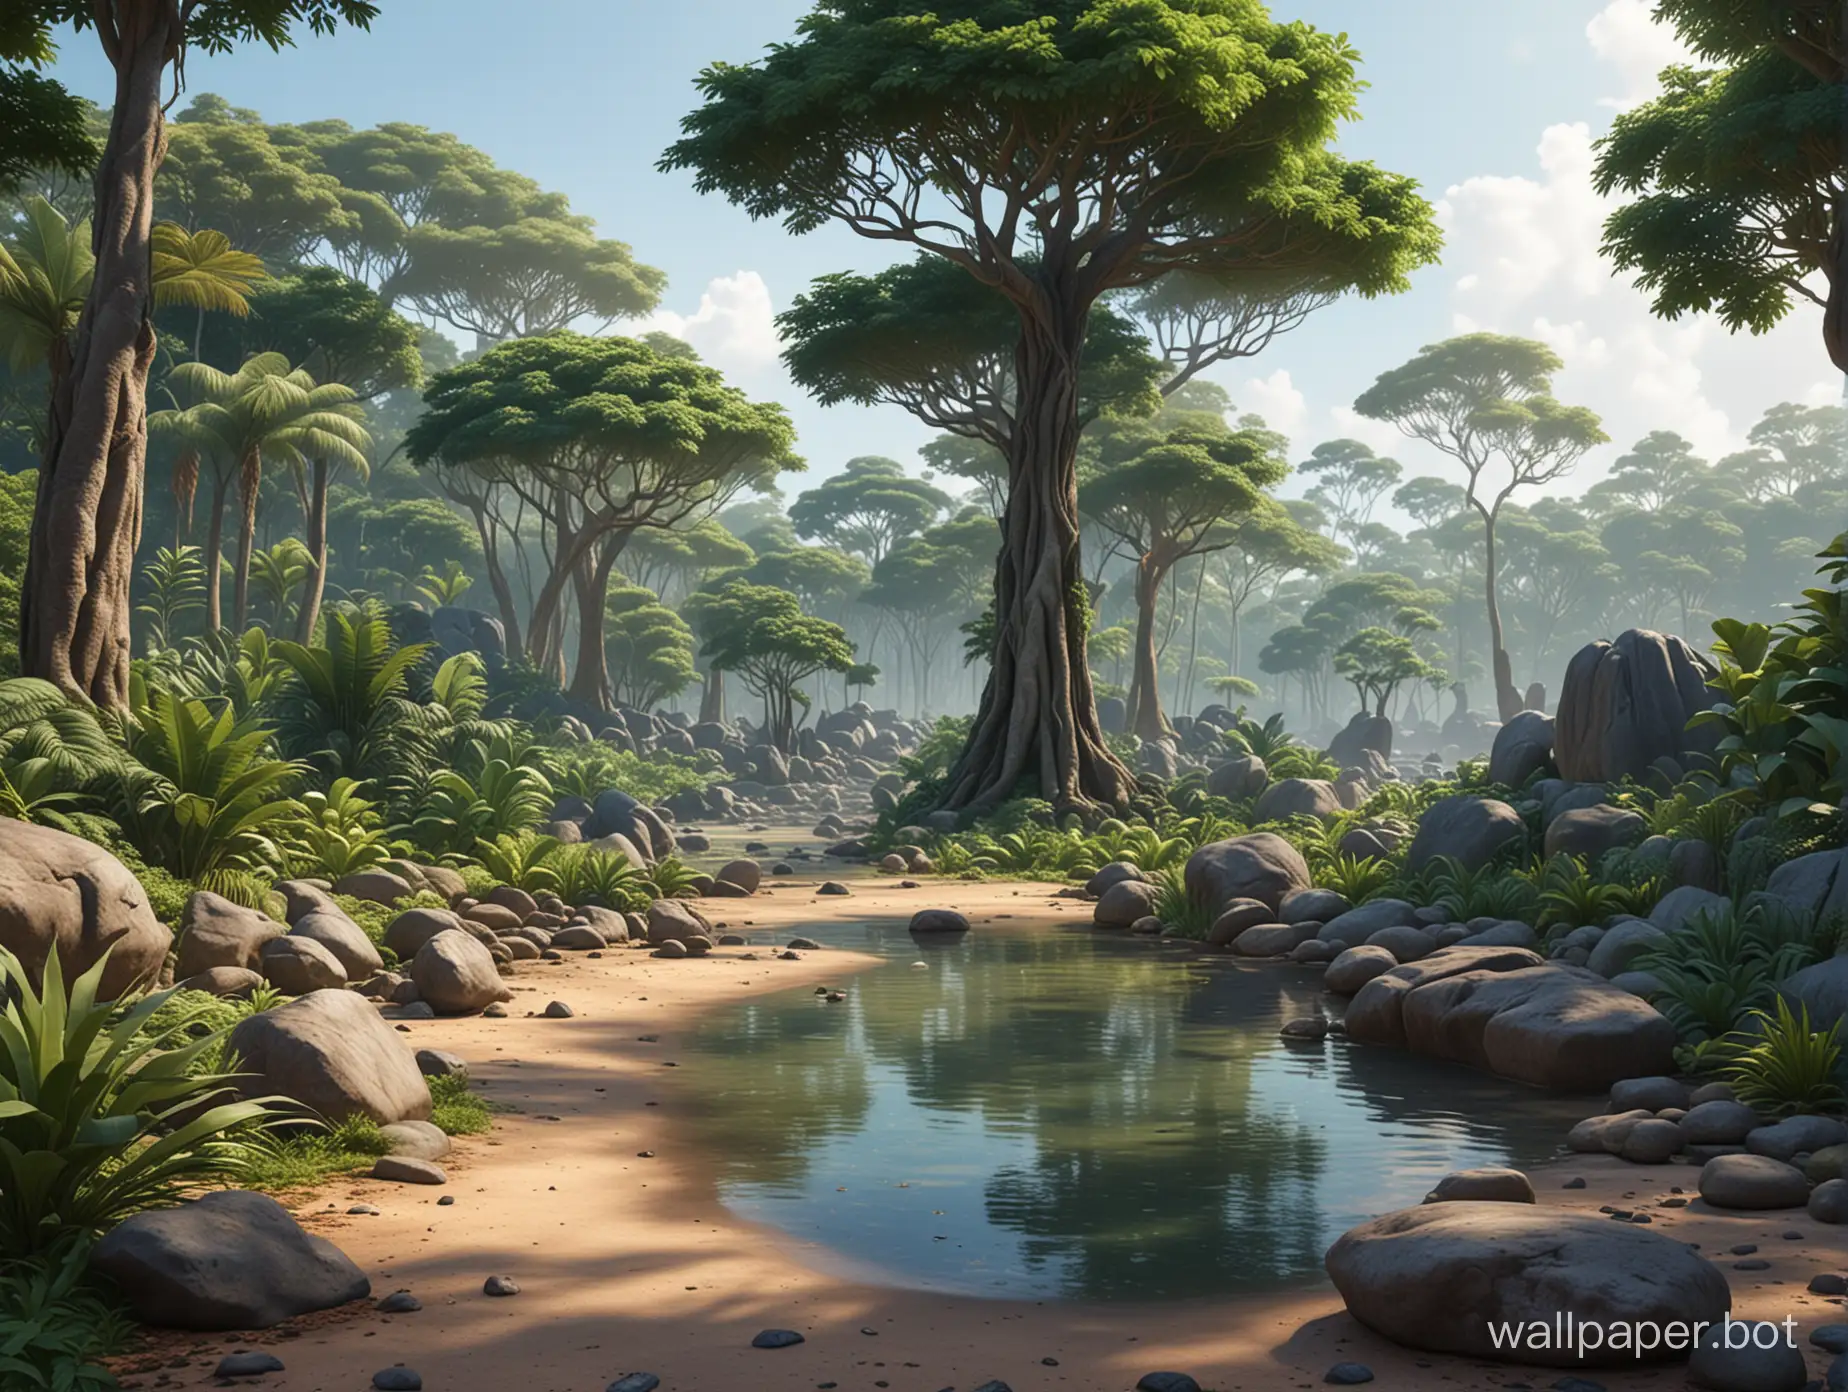 Tropical Forest in the background with a variety of trees, stones in front on flat ground, forest scenery, realistic and detailed foliage, a water body in the back, and ground in front, Disney style.